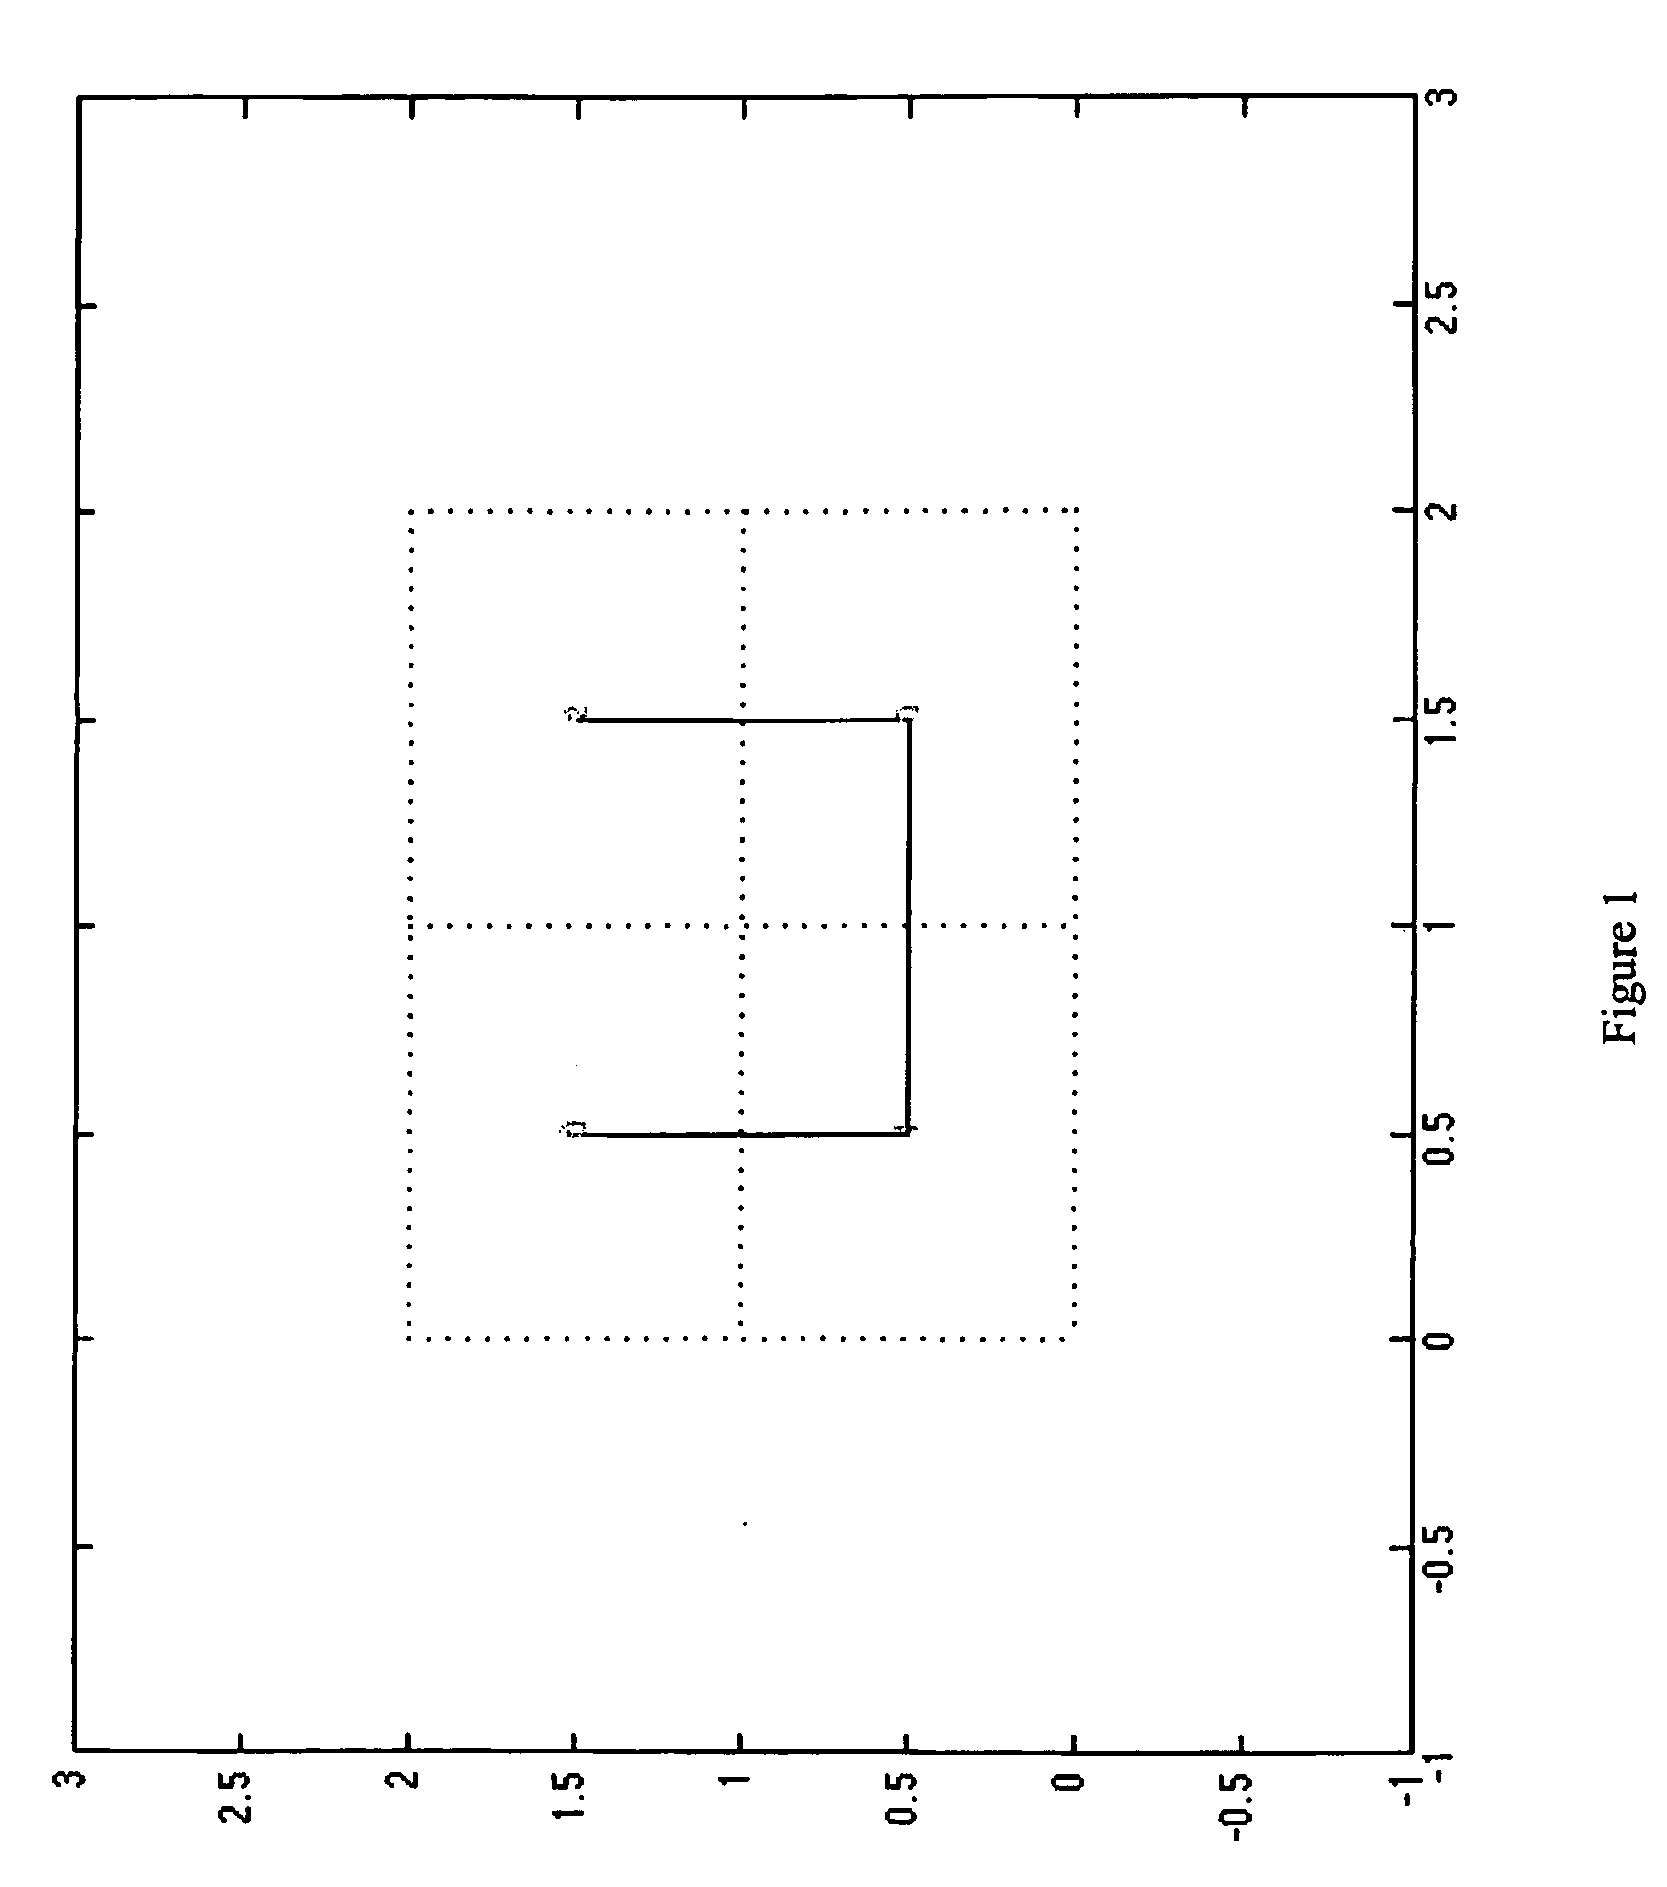 Method of providing space filling patterns